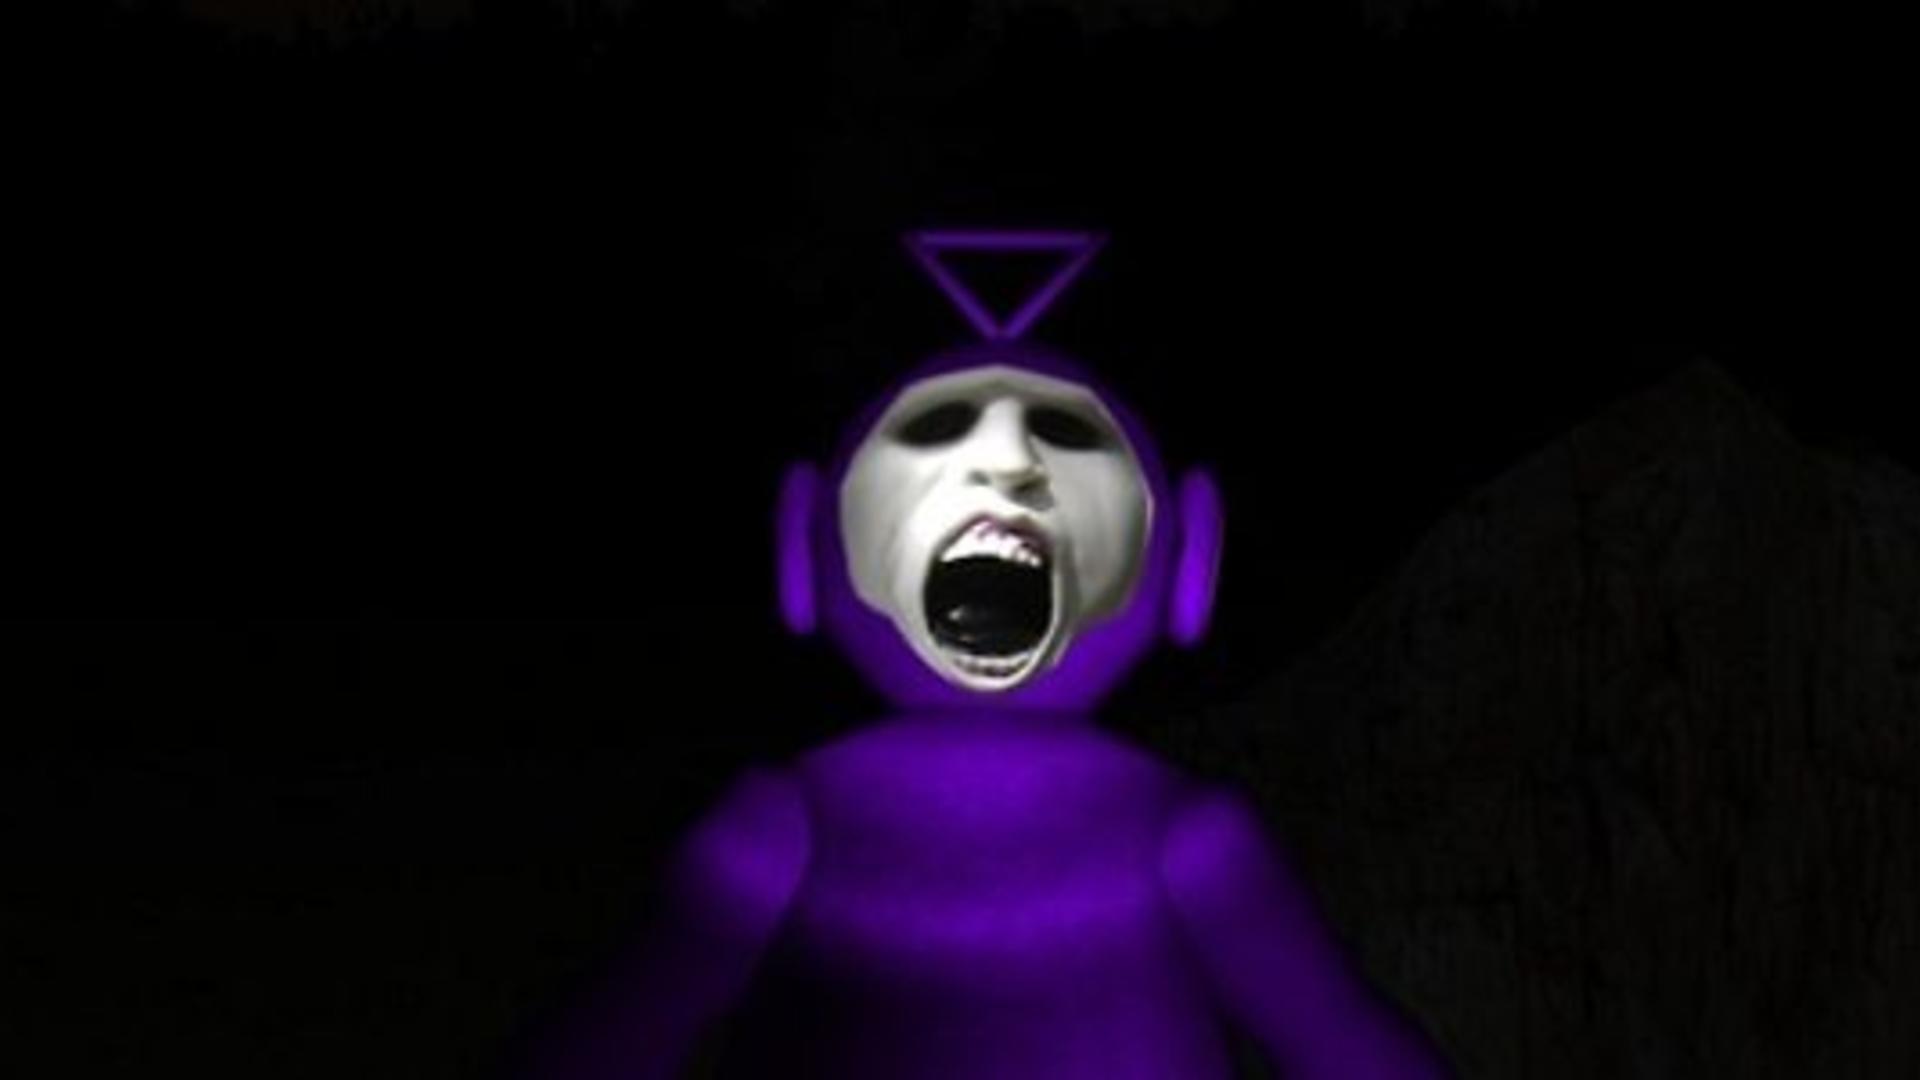 Scary Teletubbies Image